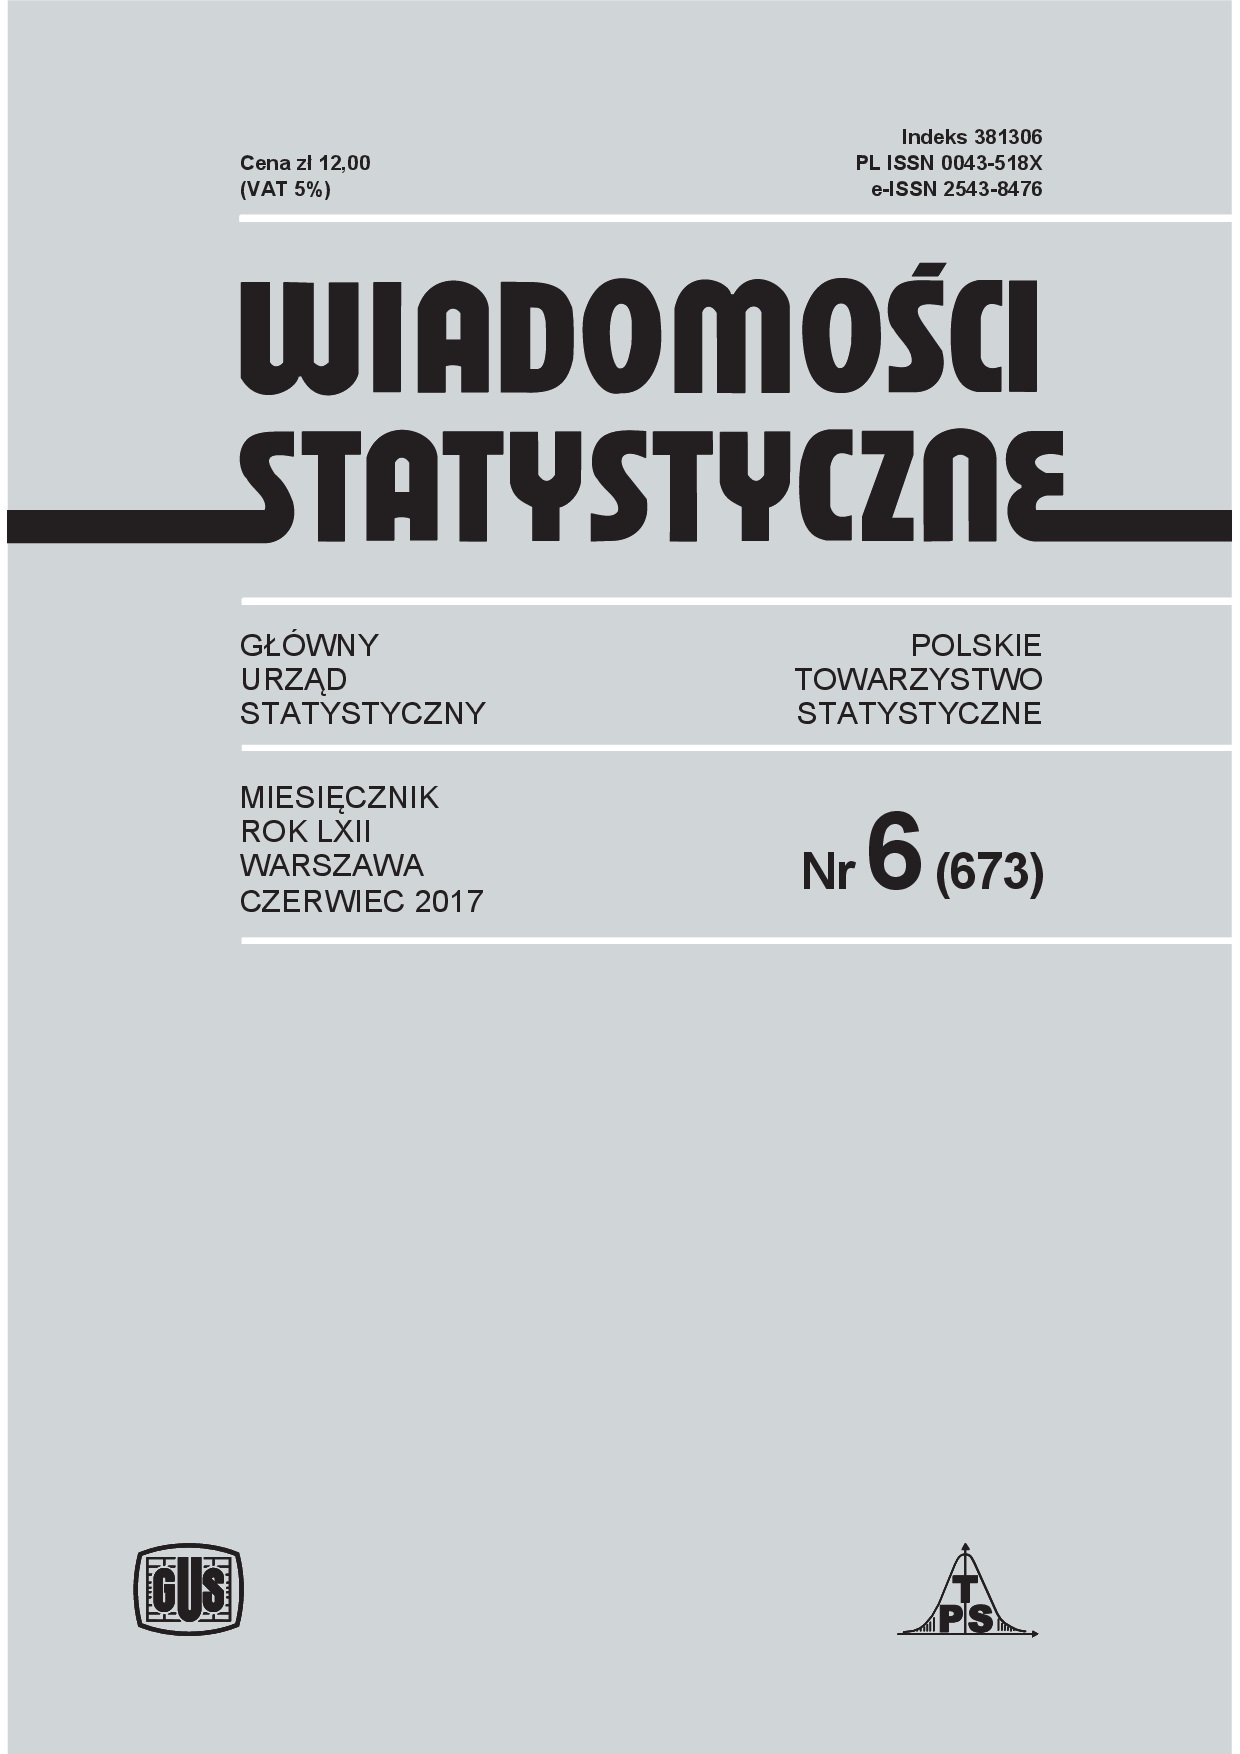 Conditions and results of hunting activity in Poland by voivodships Cover Image